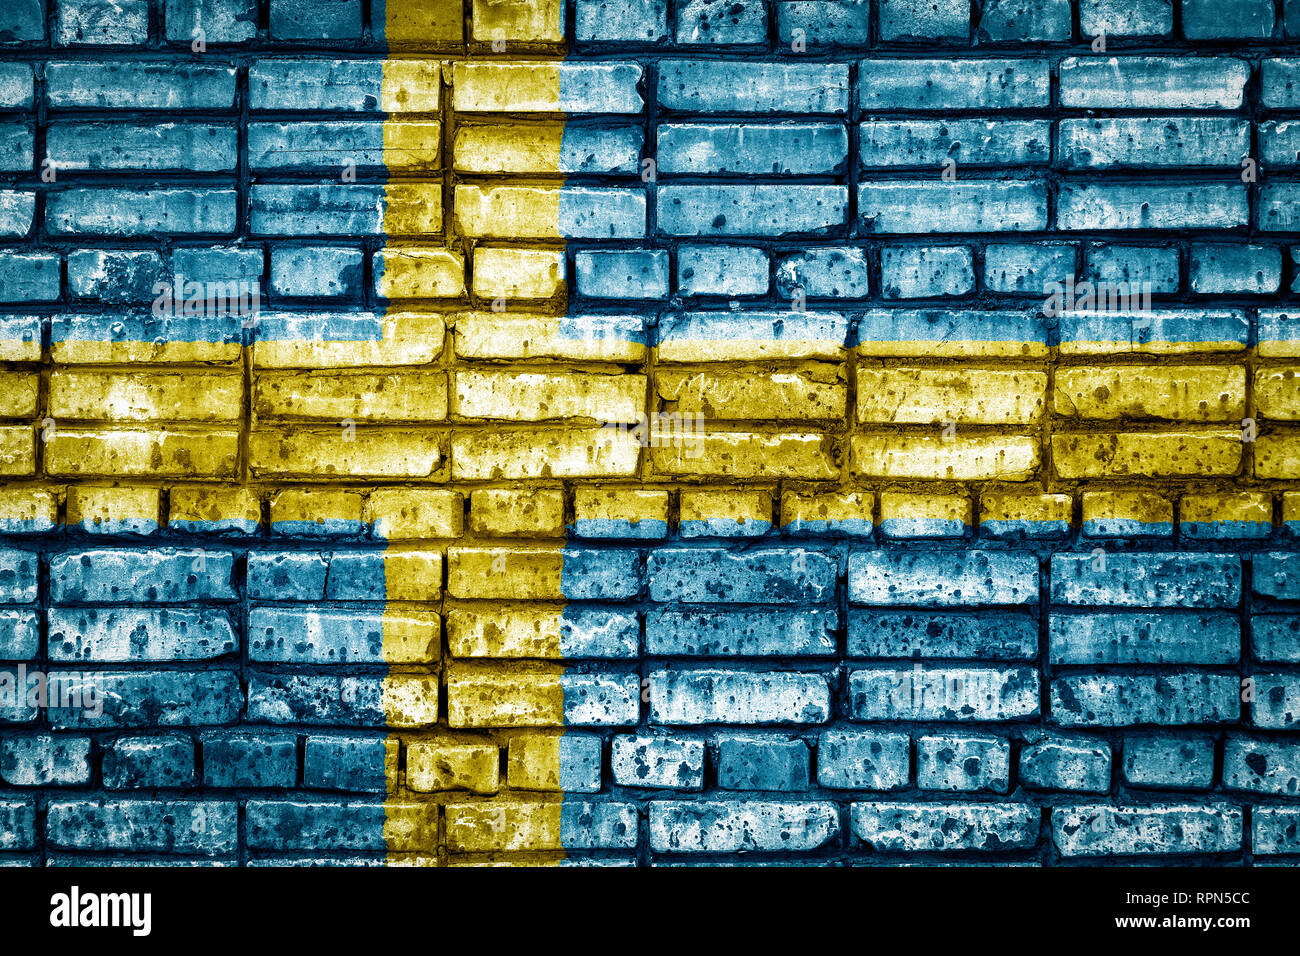 National flag of Sweden on a brick background. Concept image for Sweden: language , people and culture. Stock Photo